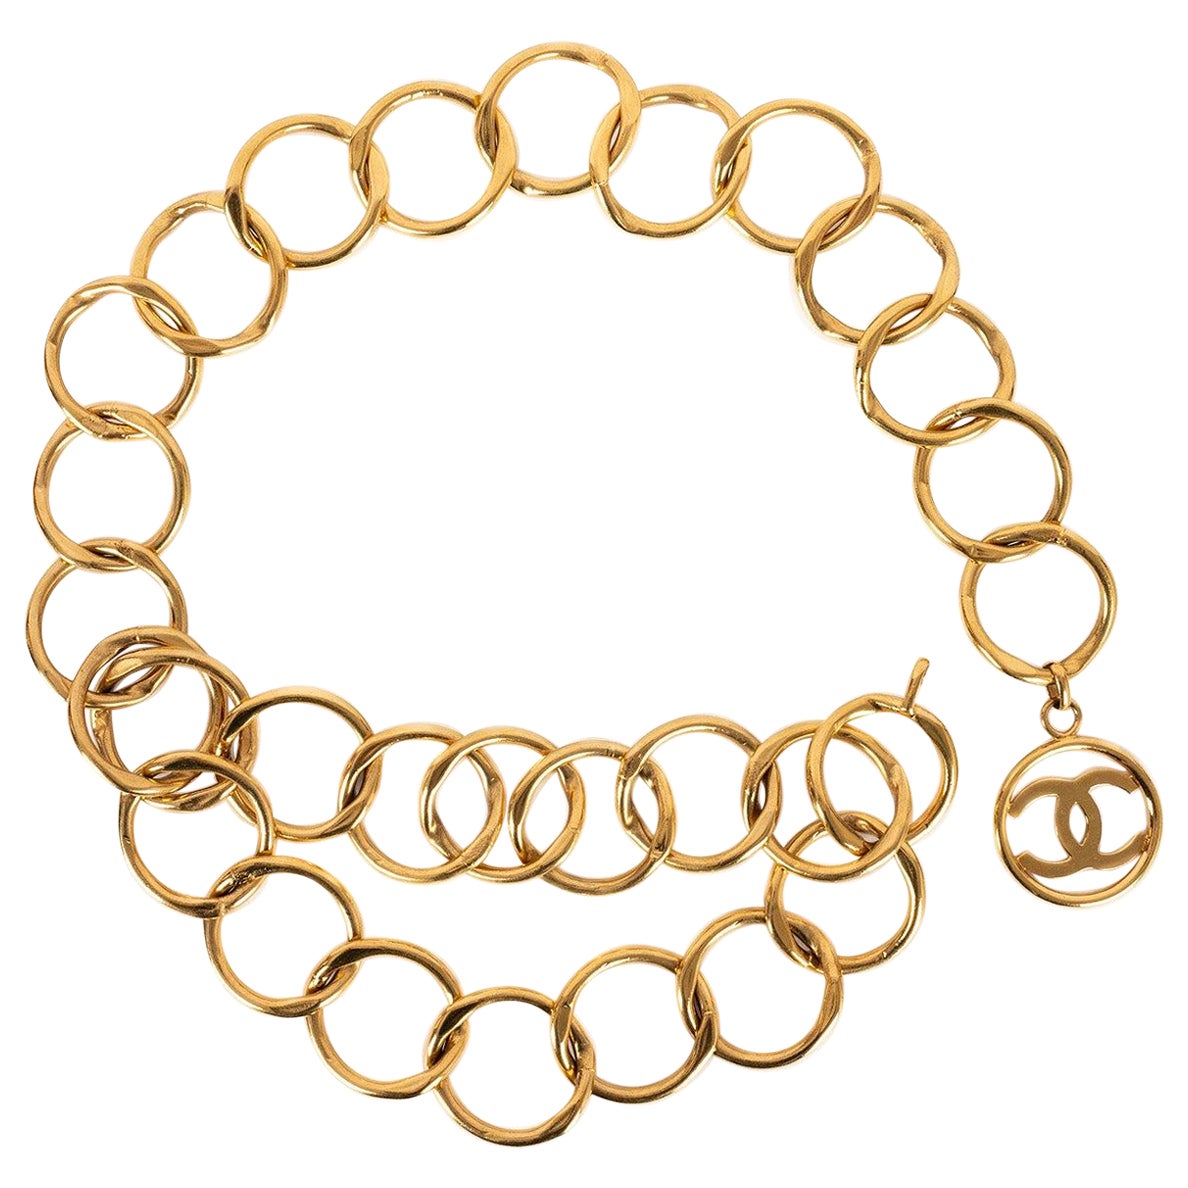 Chanel Belt Composed of Big Links in Gold-Plated Metal, 1990s For Sale